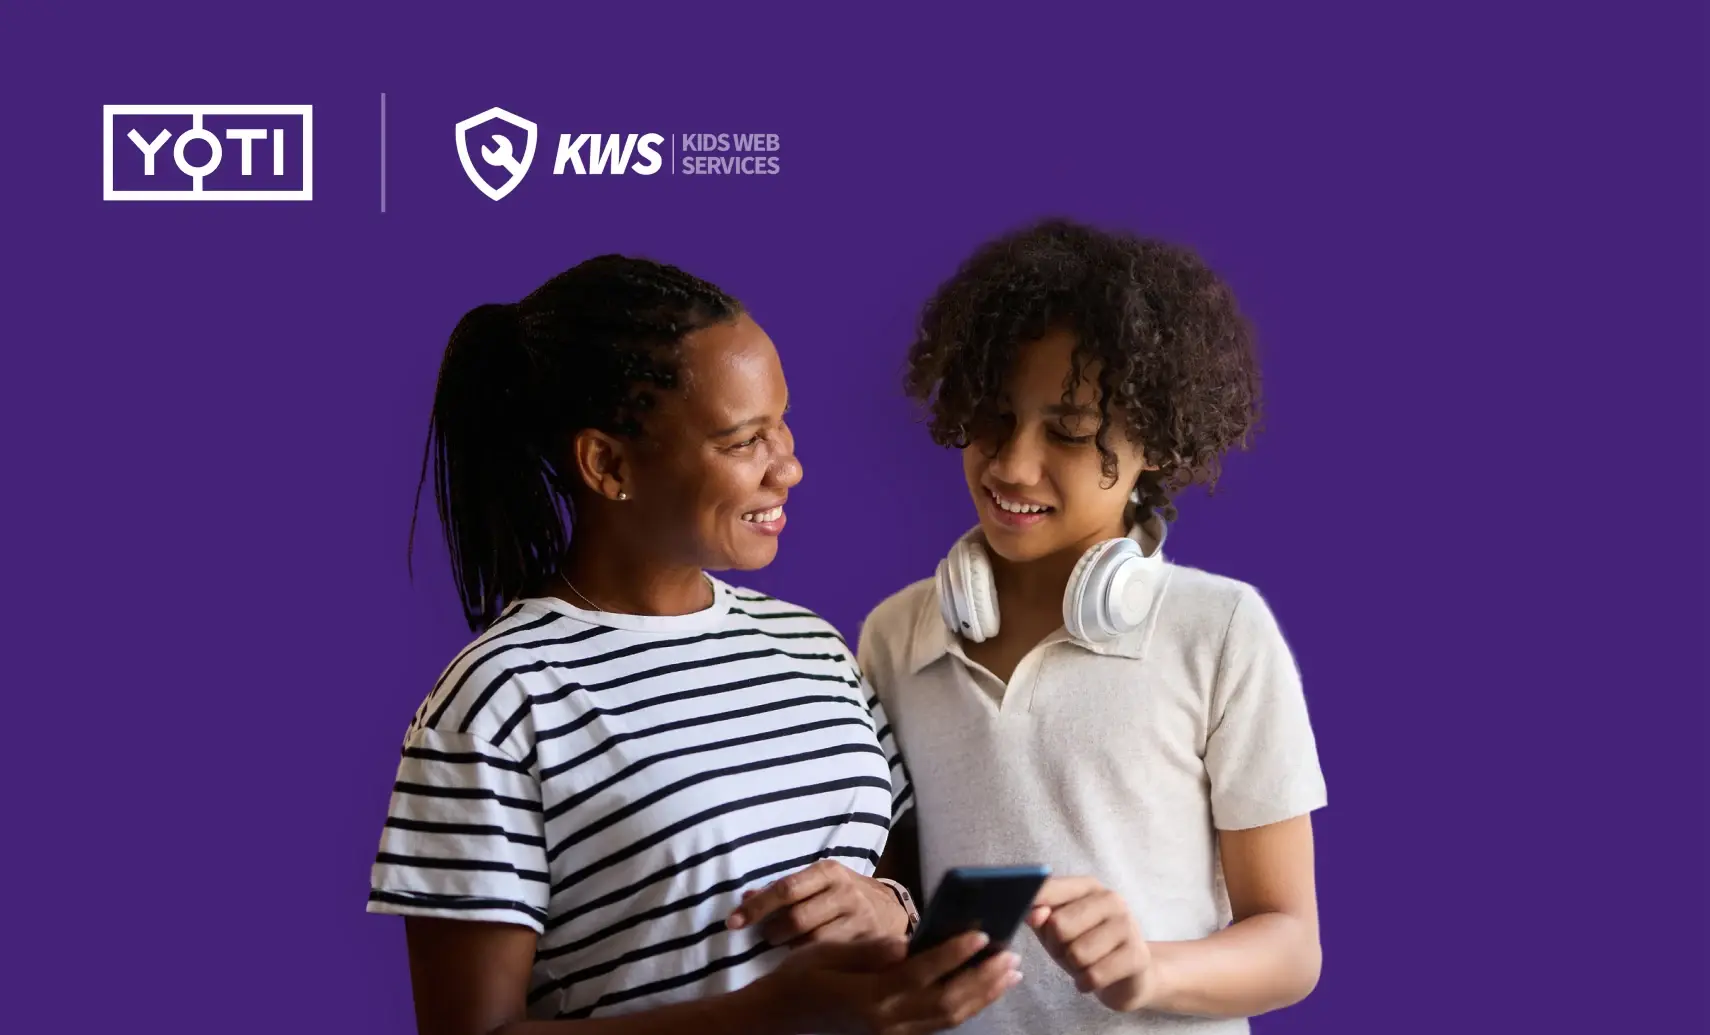 2 children using a smartphone with a puple background and Yoti and KWS logo lockup